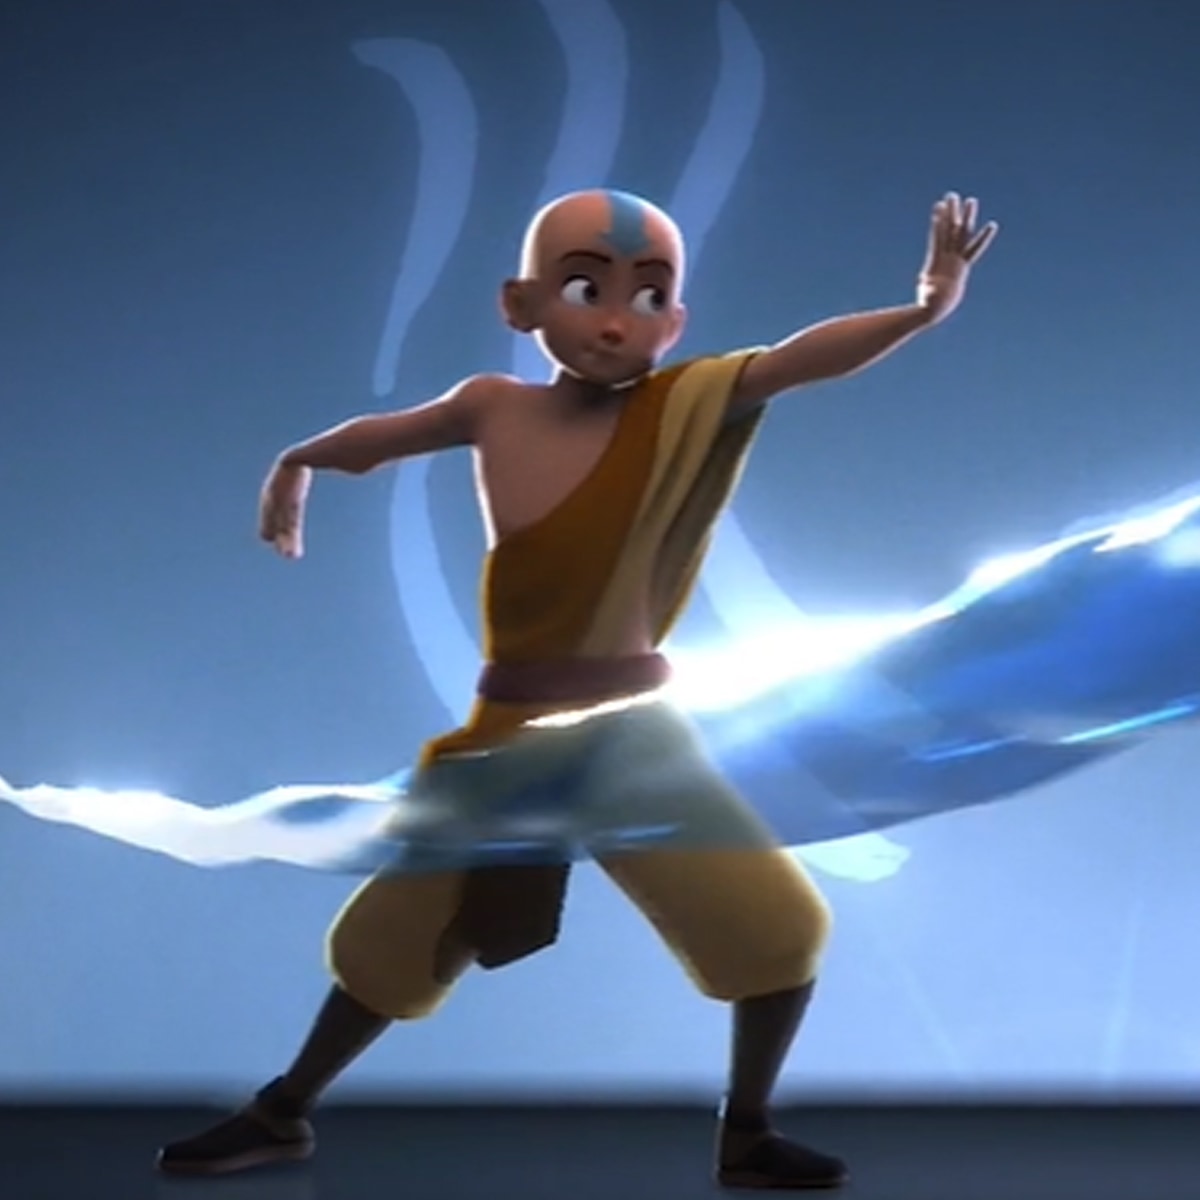 Avatar The Last Airbender  Bobble Battles video game realtime  strategy reviews  ratings  Glitchwave